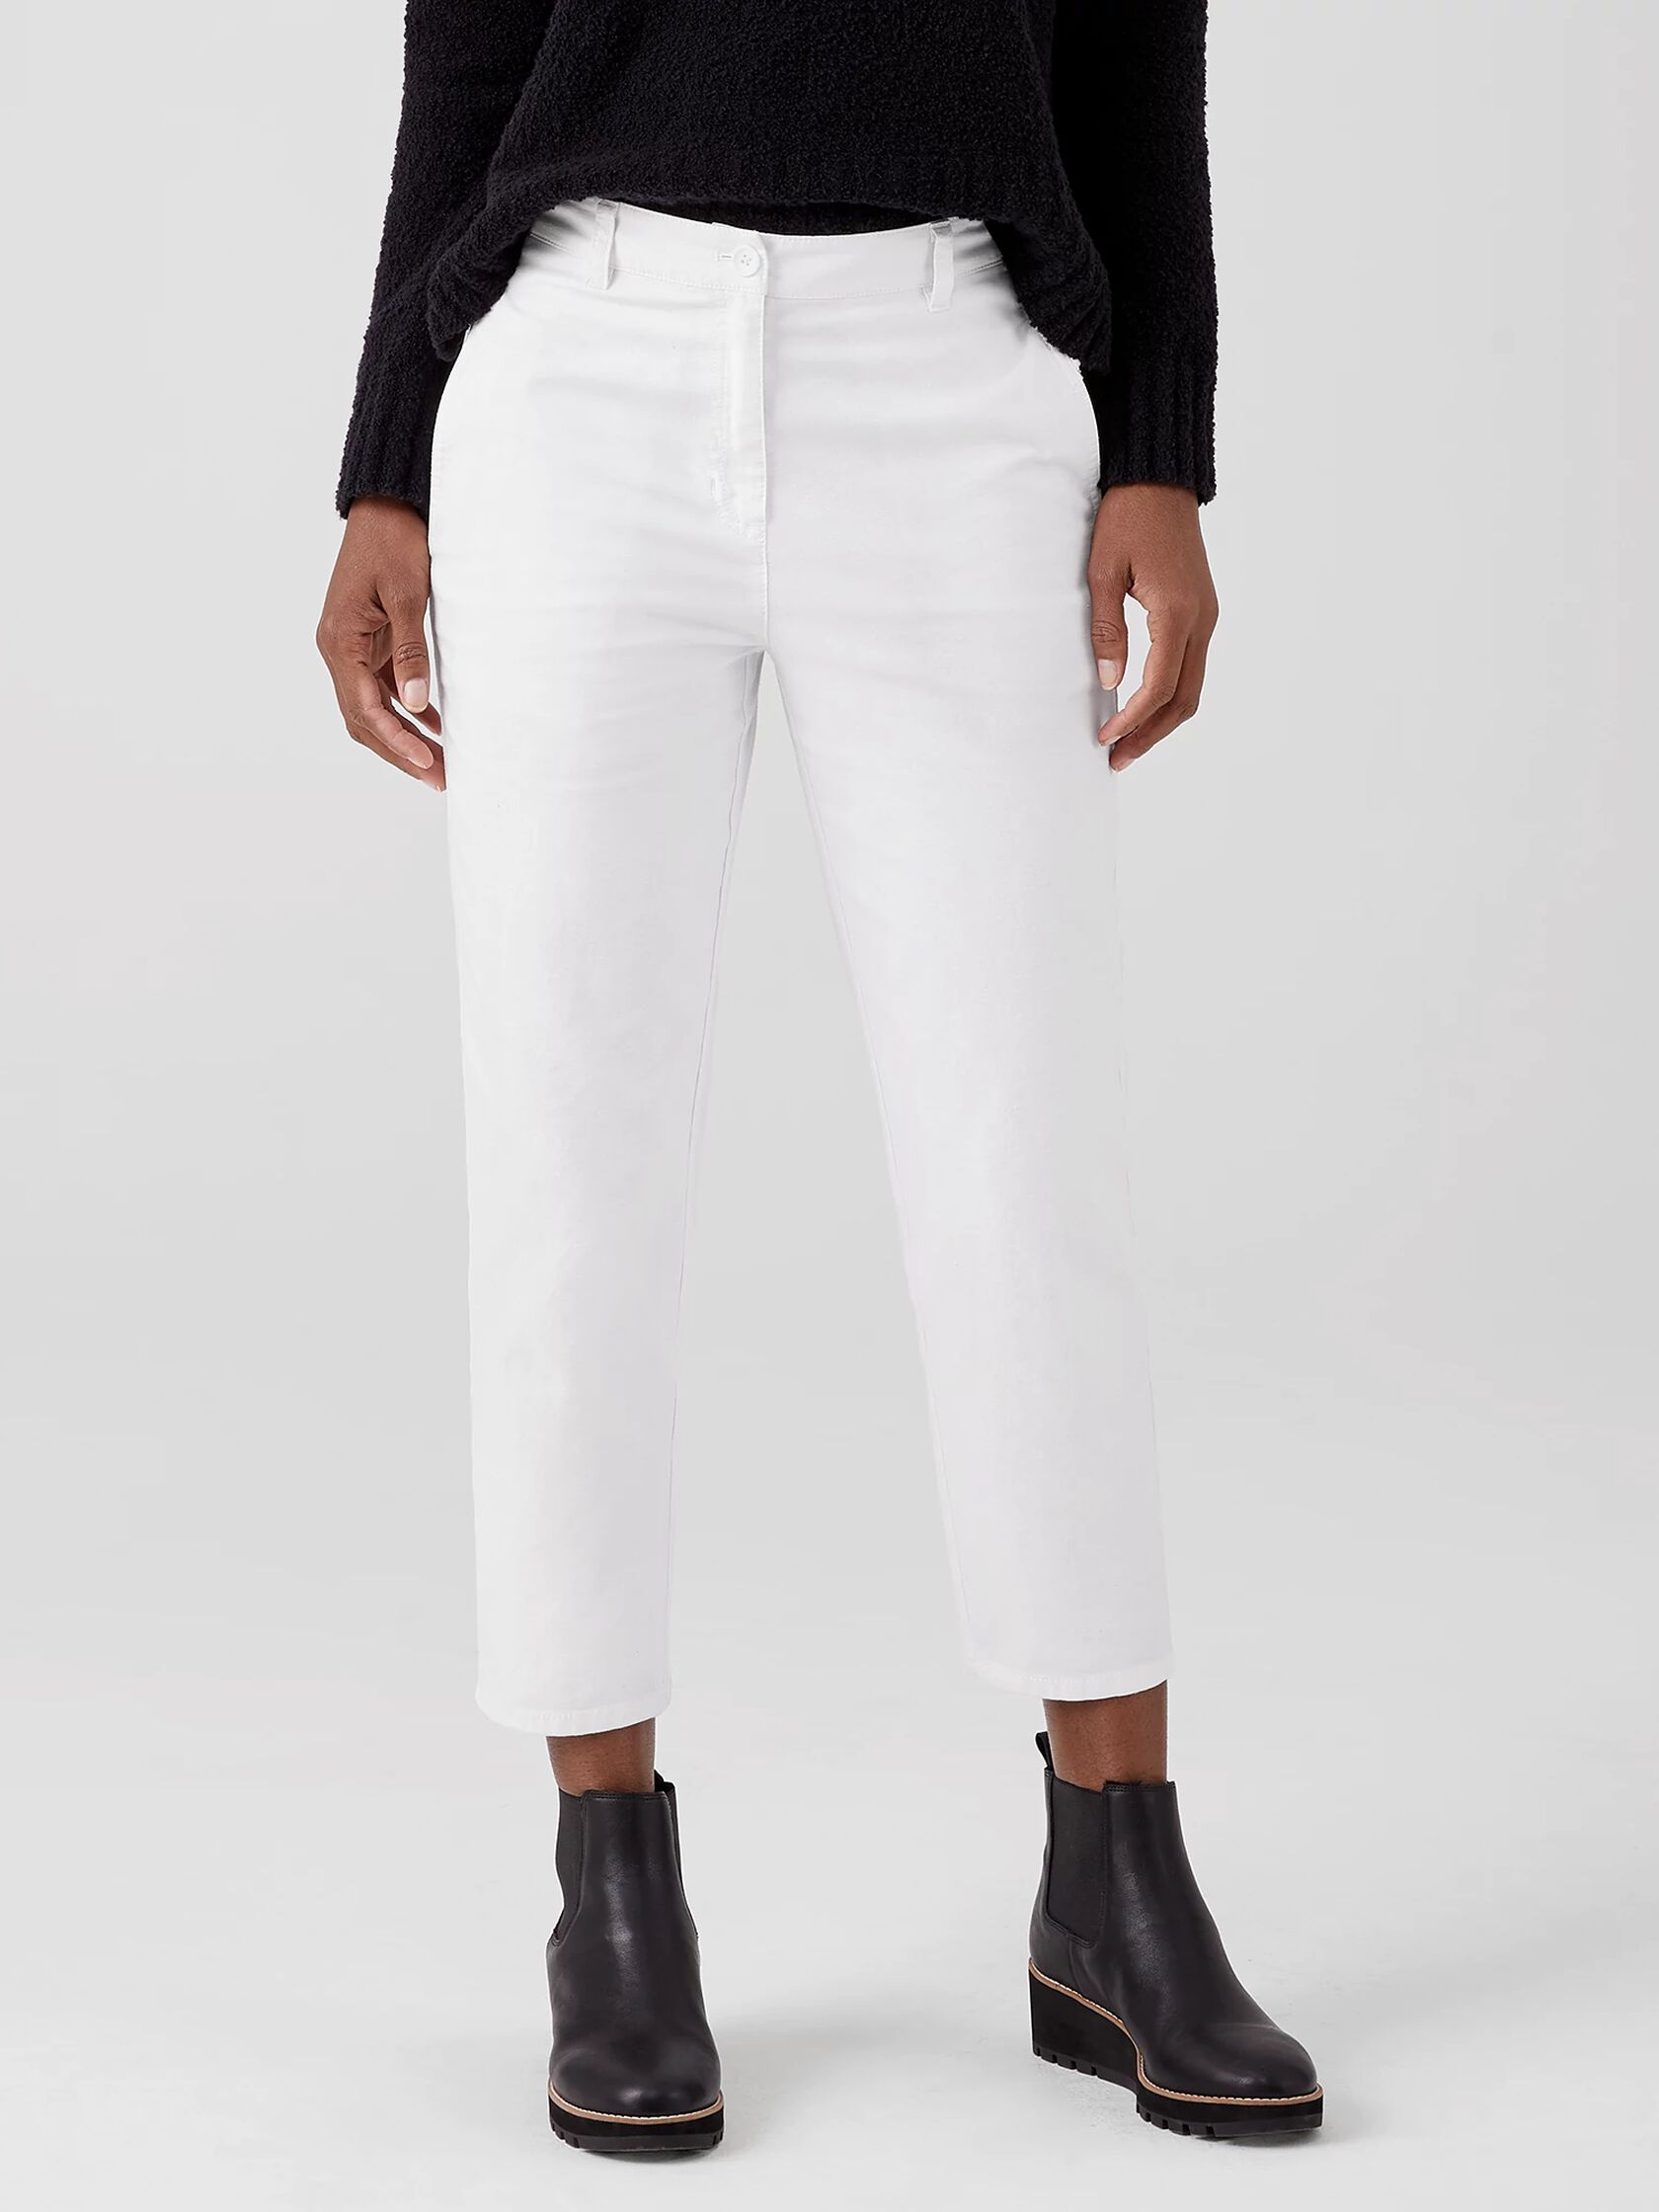 Cotton Hemp Tapered Ankle Pant